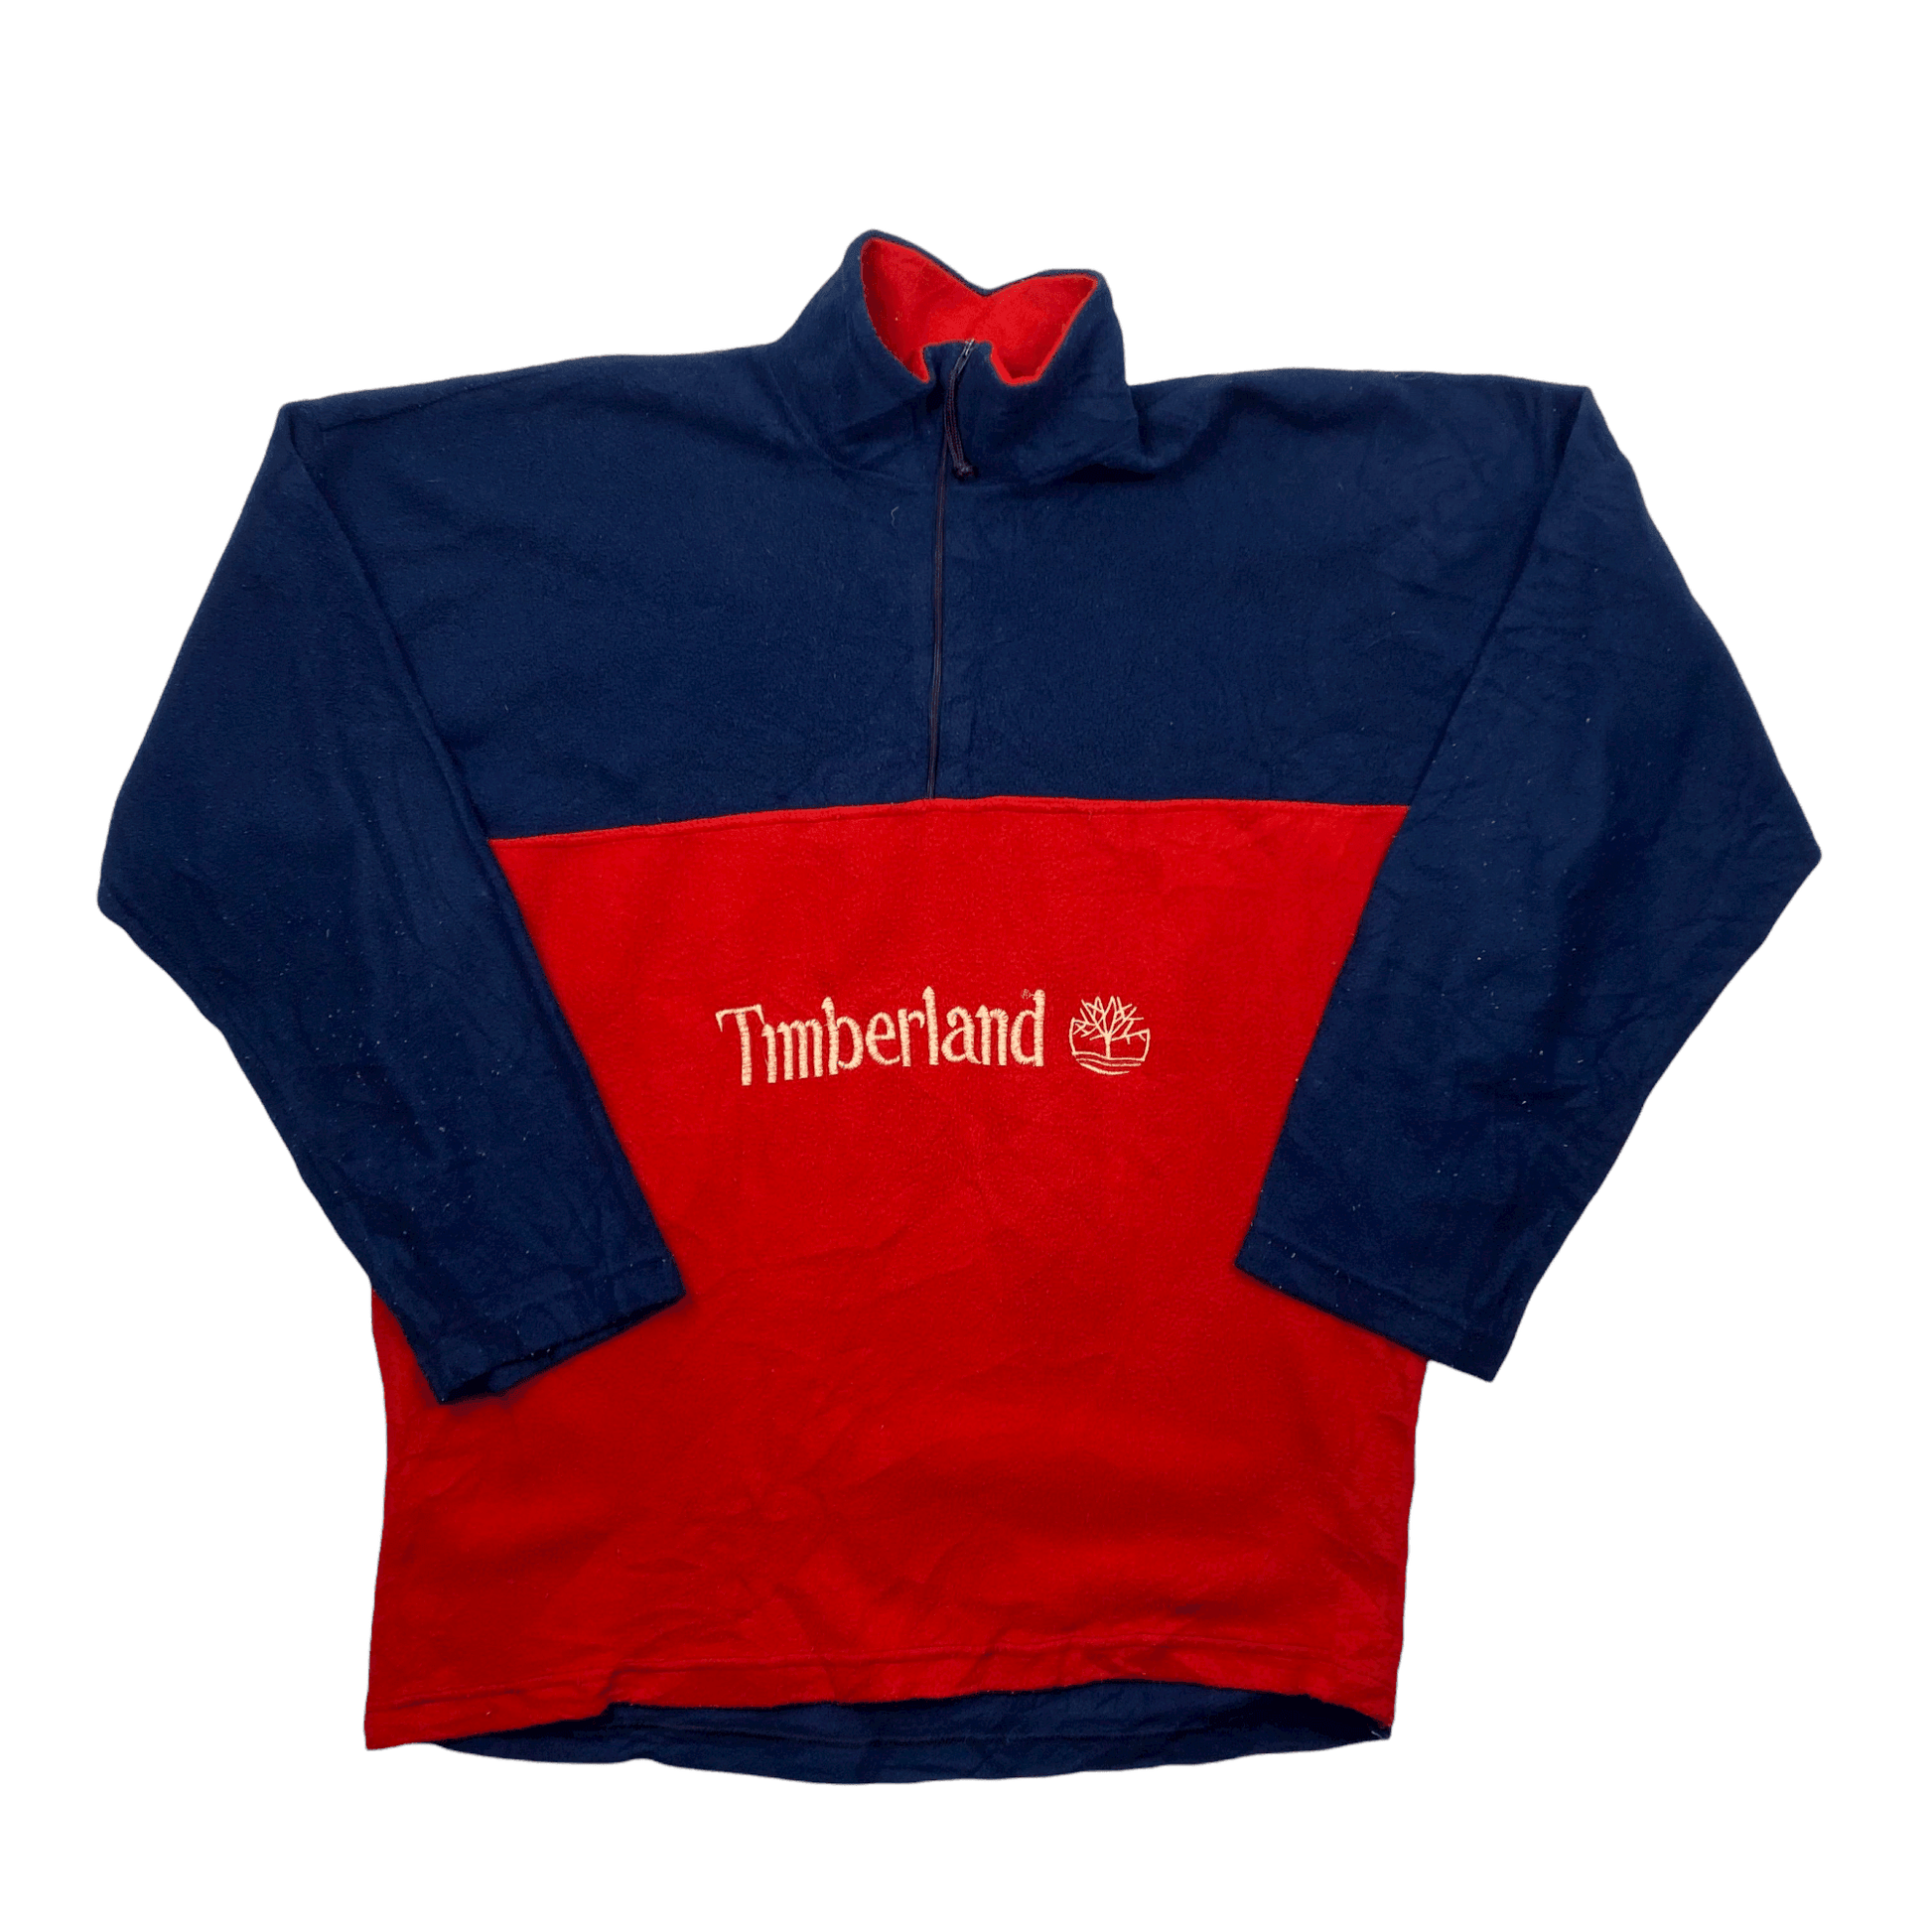 Vintage 90s Navy Blue + Red Timberland Spell-Out Quarter Zip Fleece - Large - The Streetwear Studio